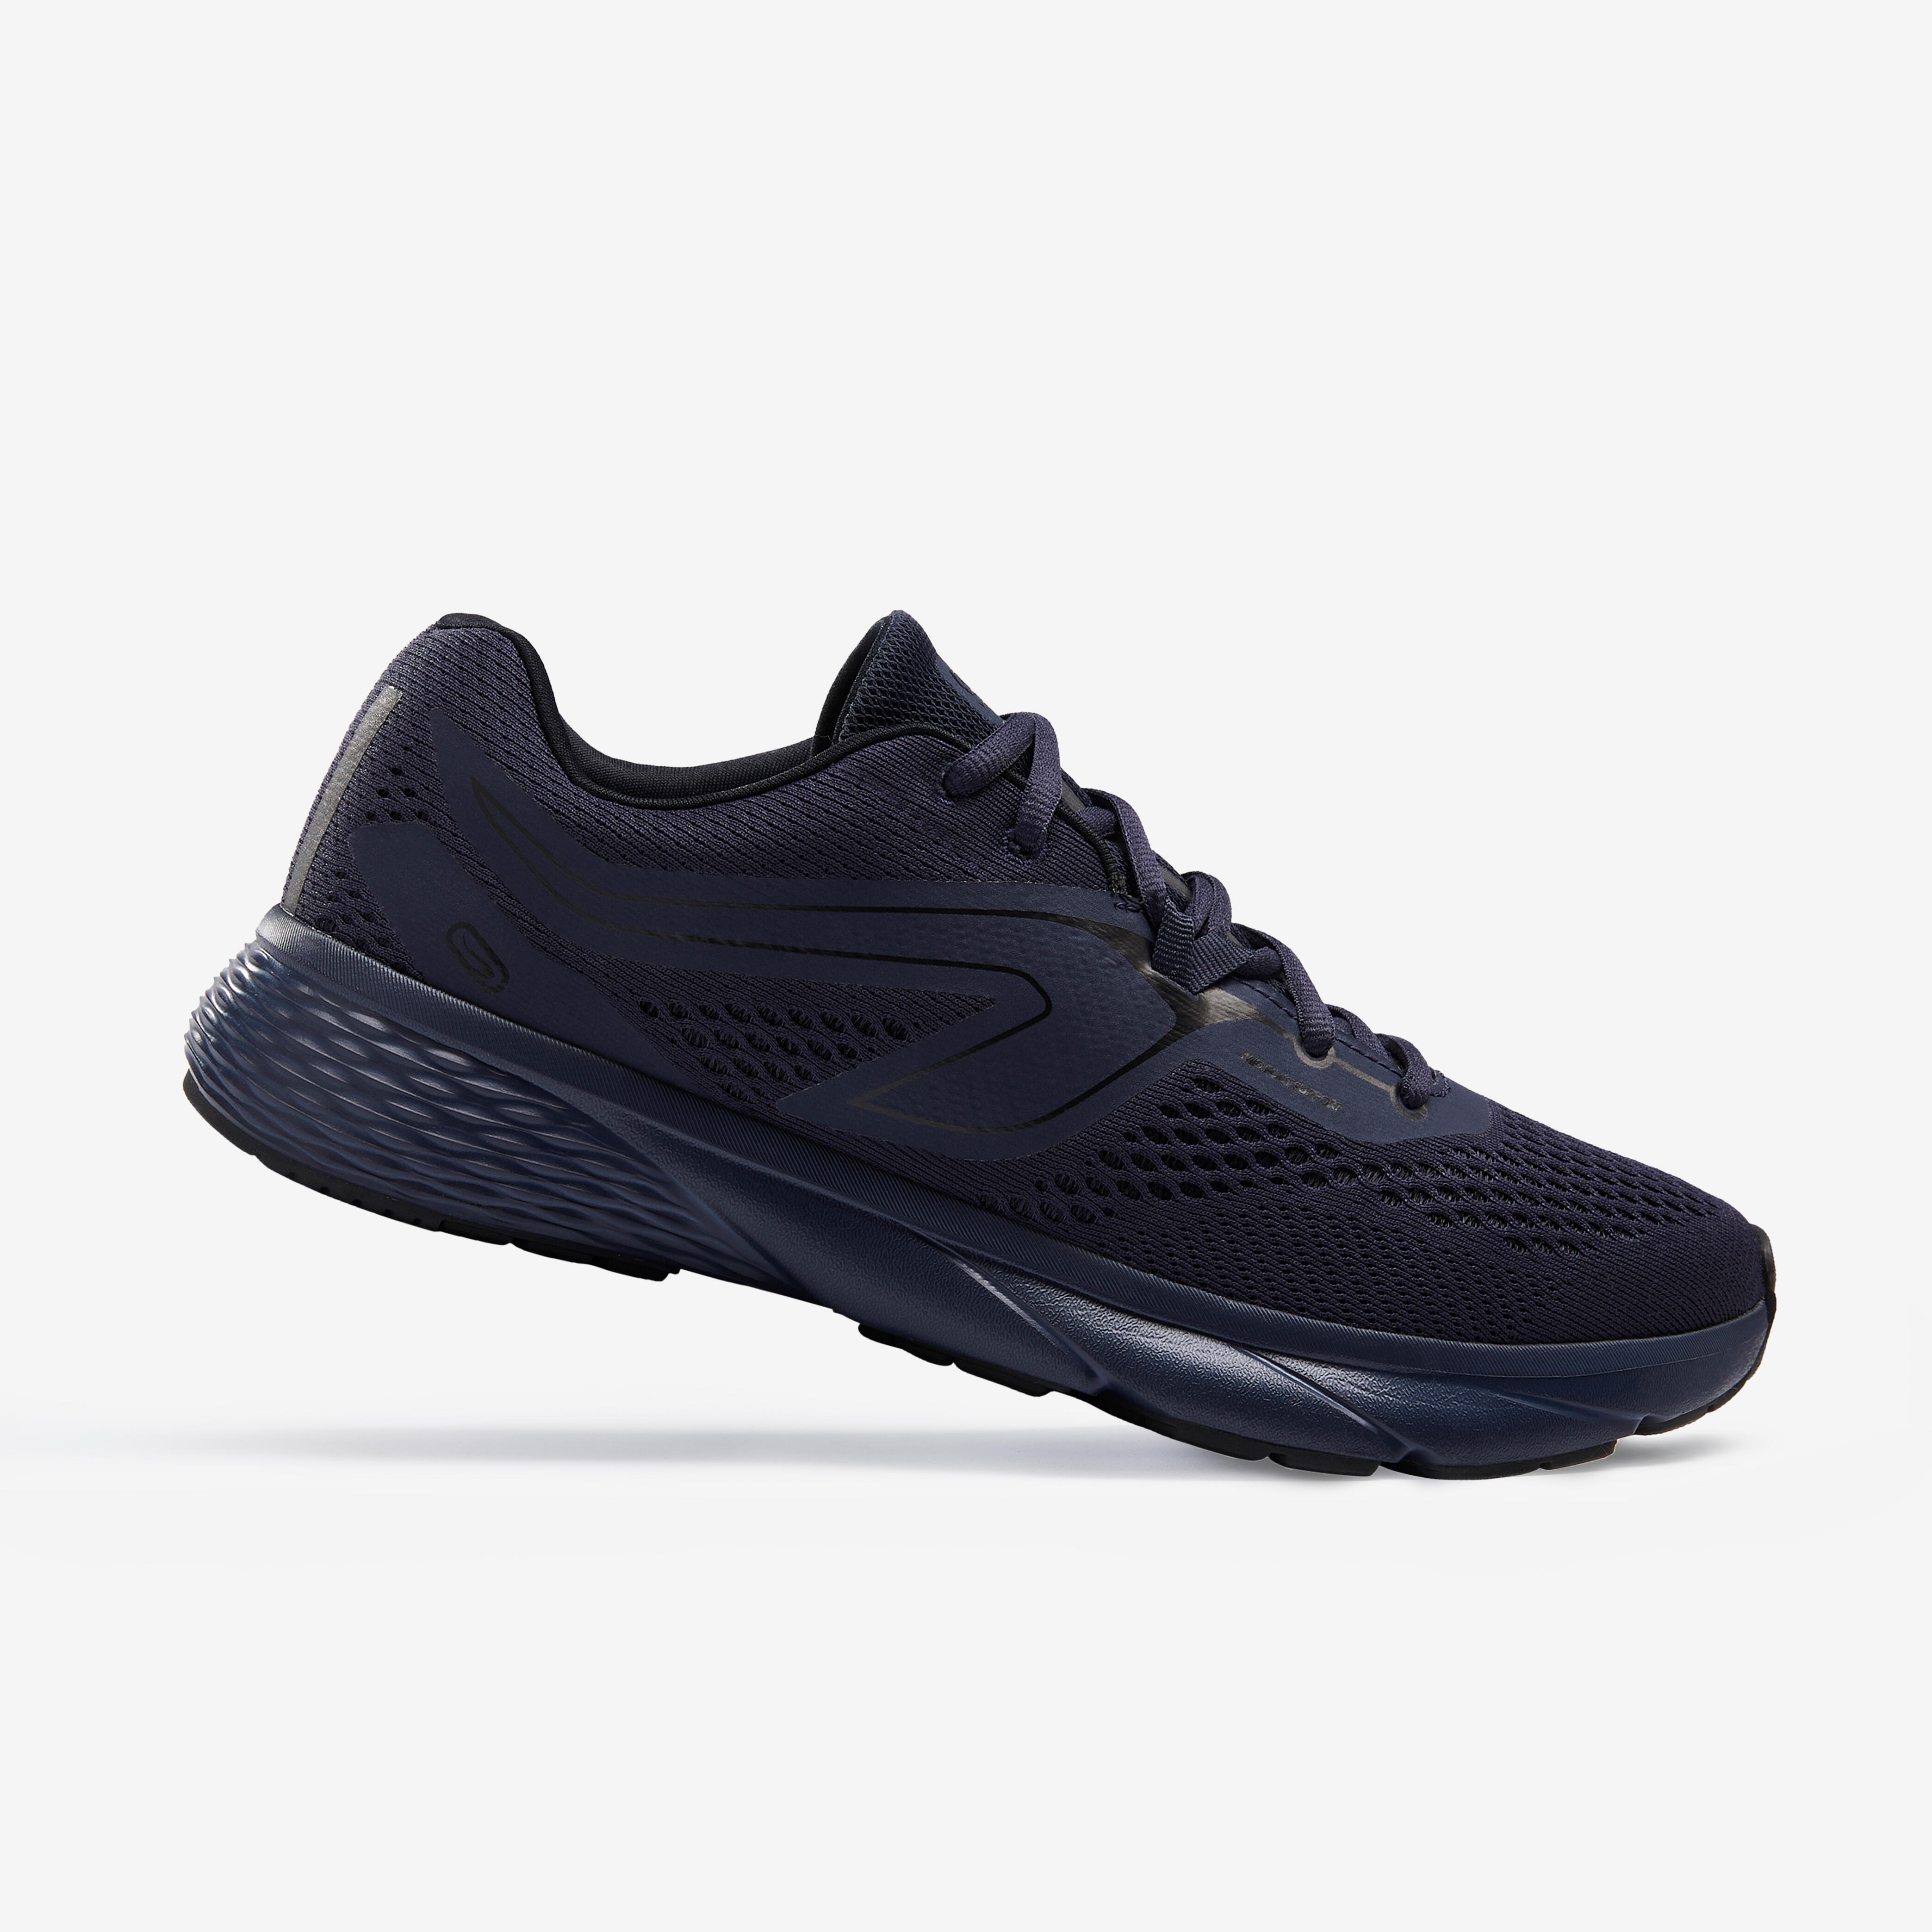 Nike Running Shoes  Buy Nike Running Shoes Online at Best Prices In India   Flipkartcom